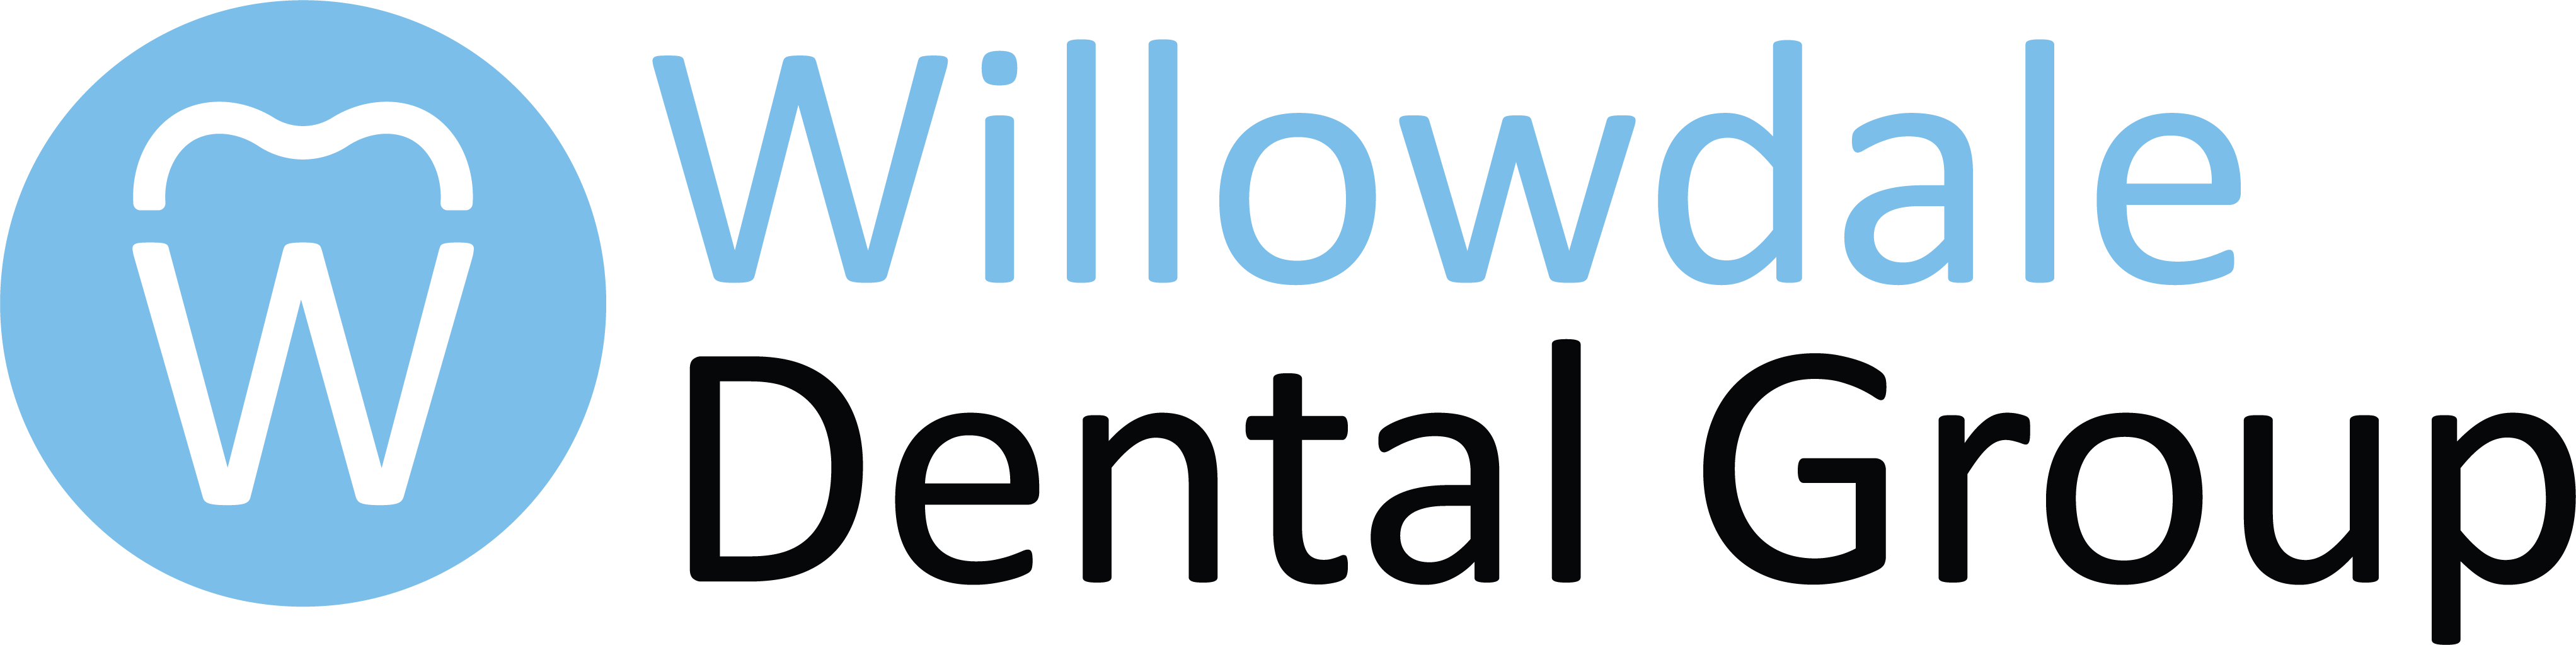 Willowdale Dental Group